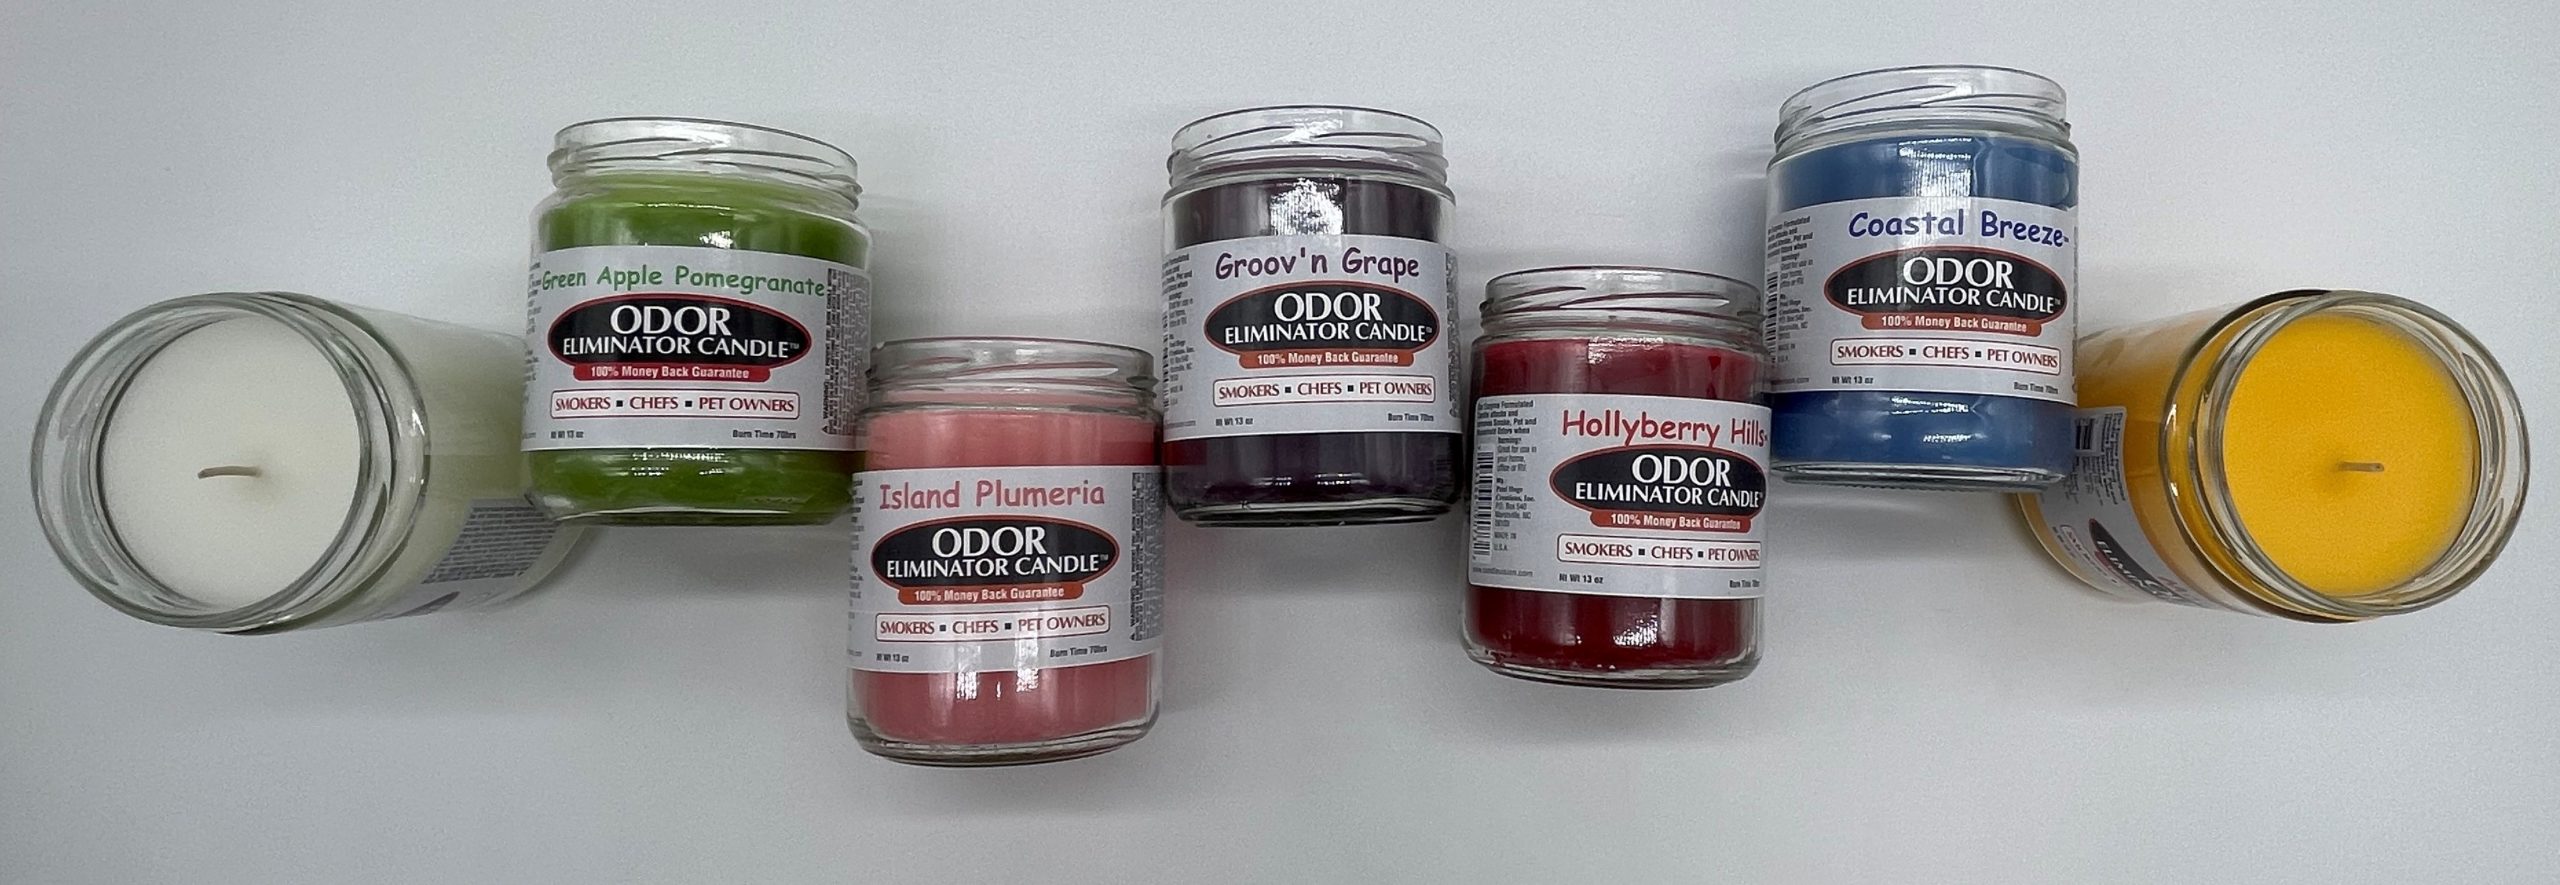 Odor Candles at An Even Greater Divide